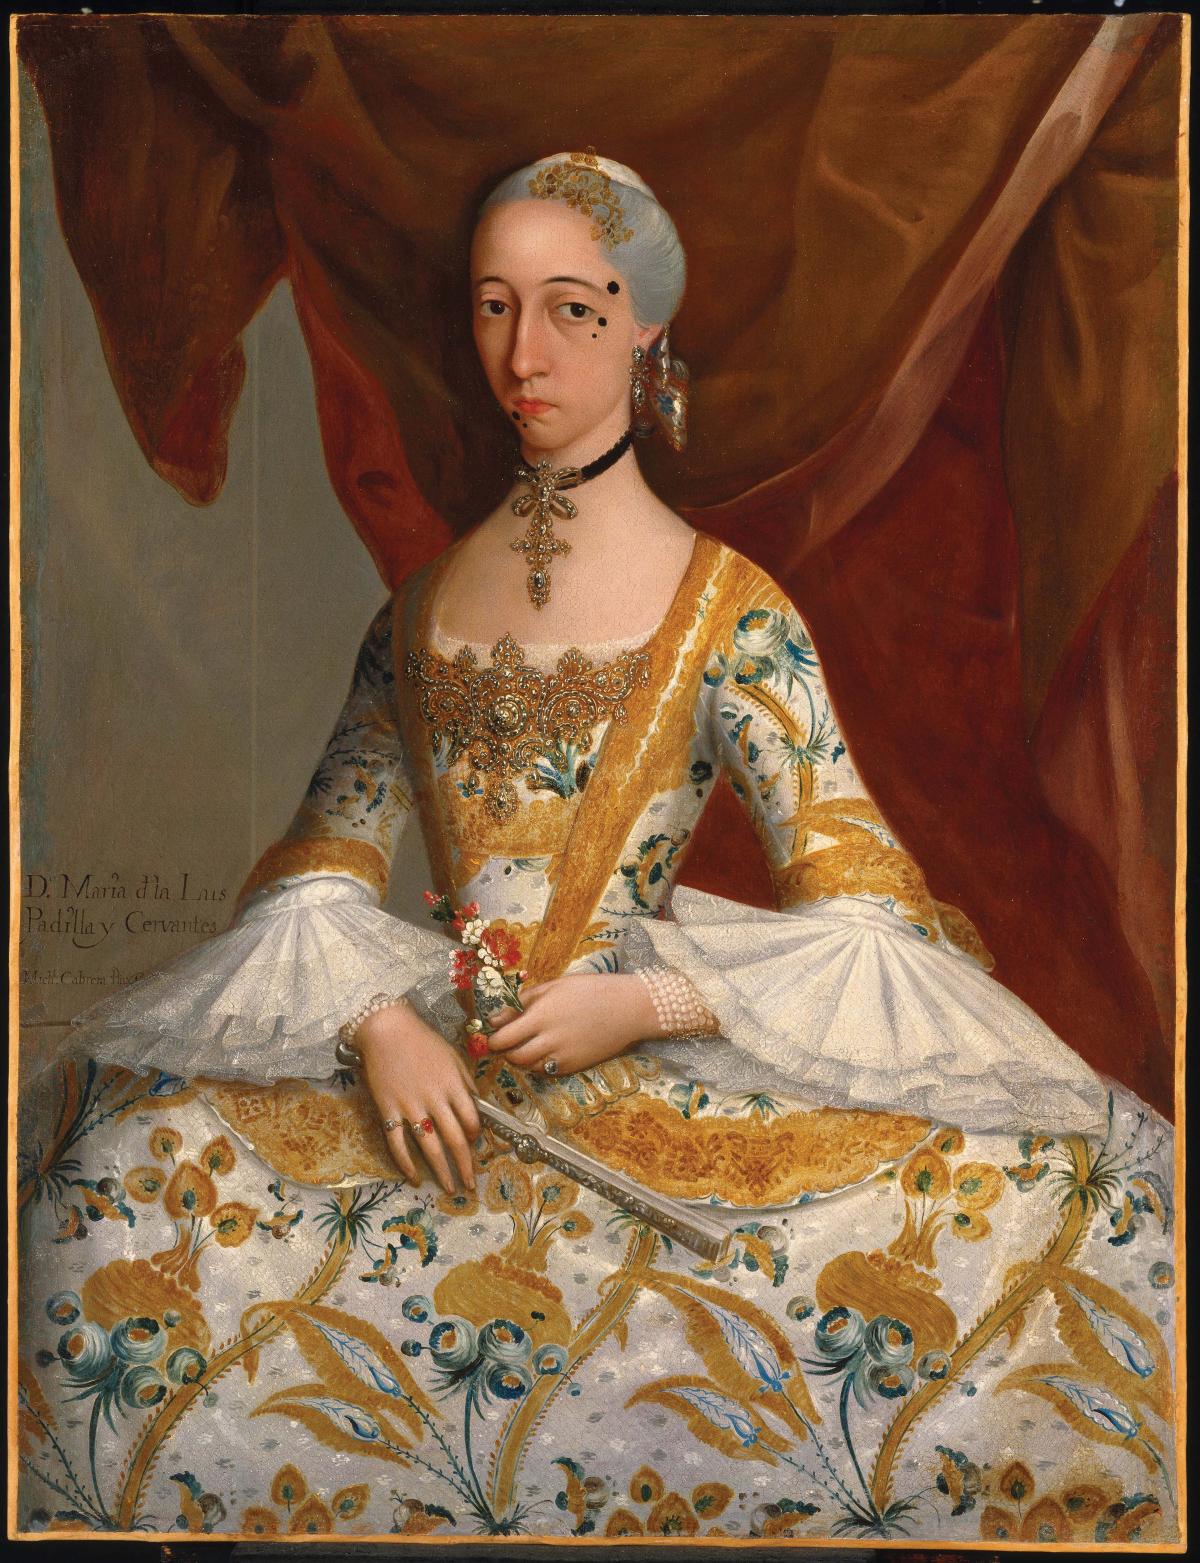 Wearing an embroidered white and gold dress with wide lace sleeves, with several large birthmarks on her face and chin